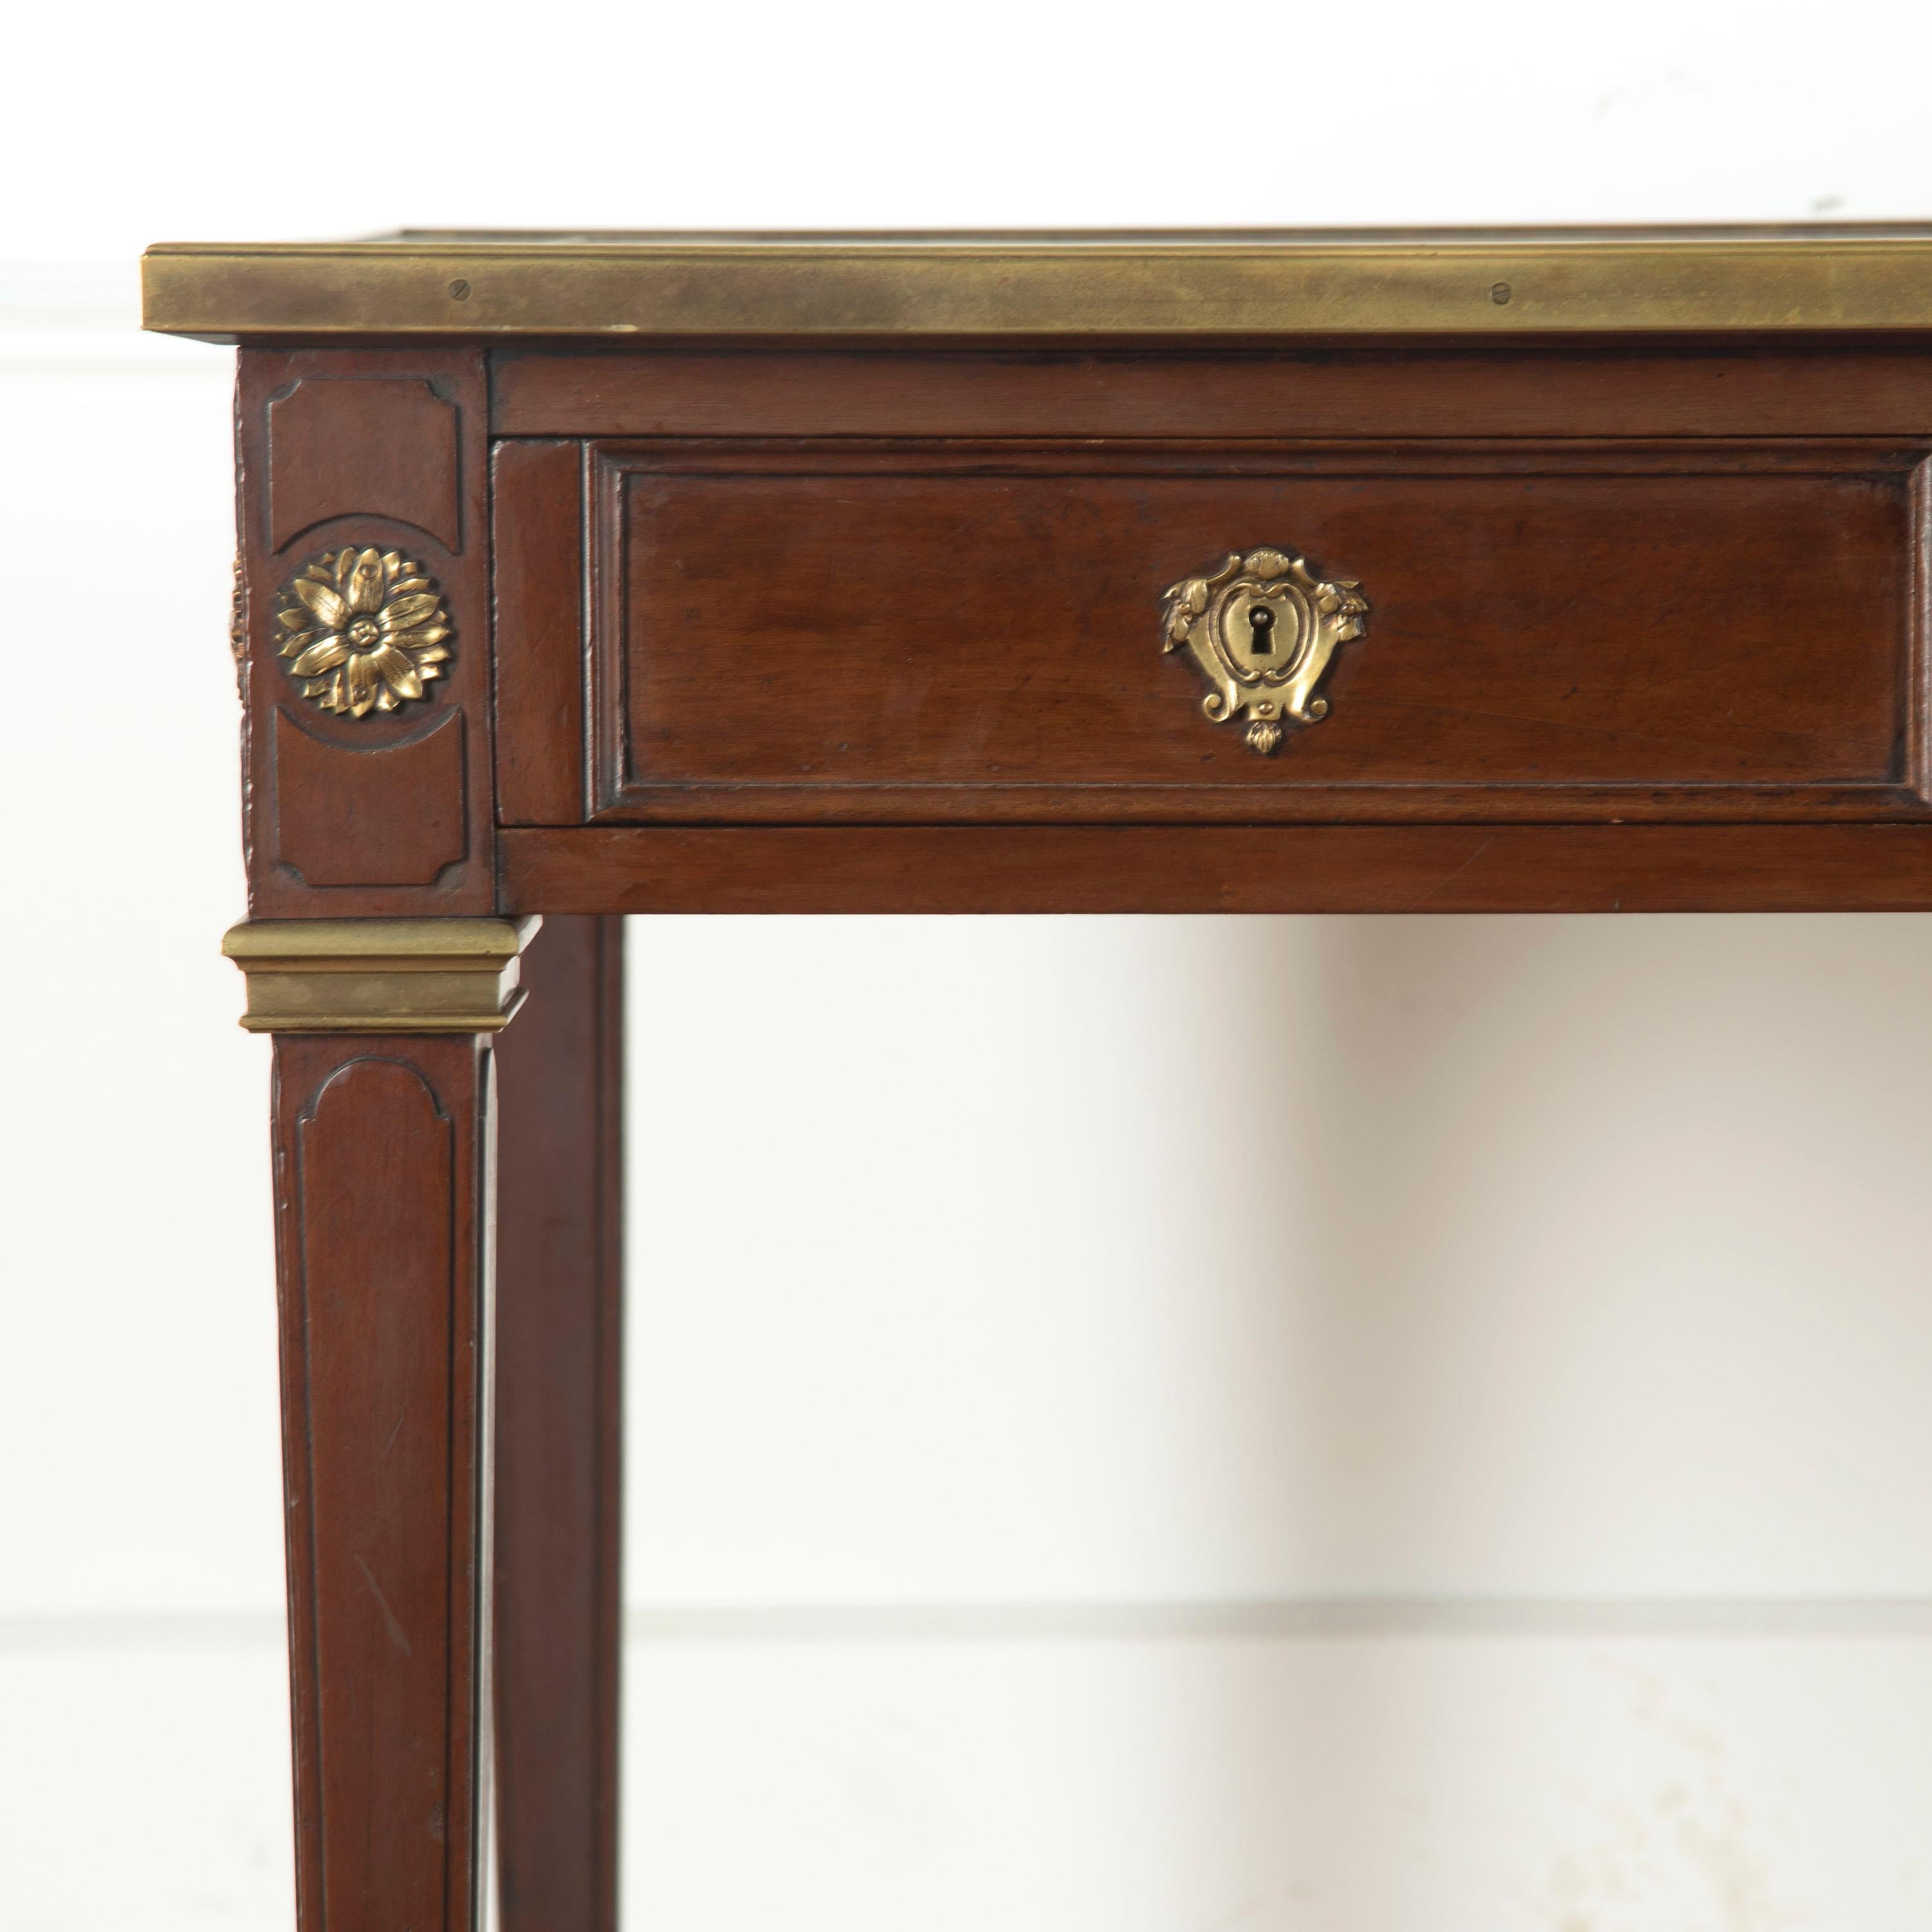 Early 20th Century French Mahogany Desk with Brass Mounts